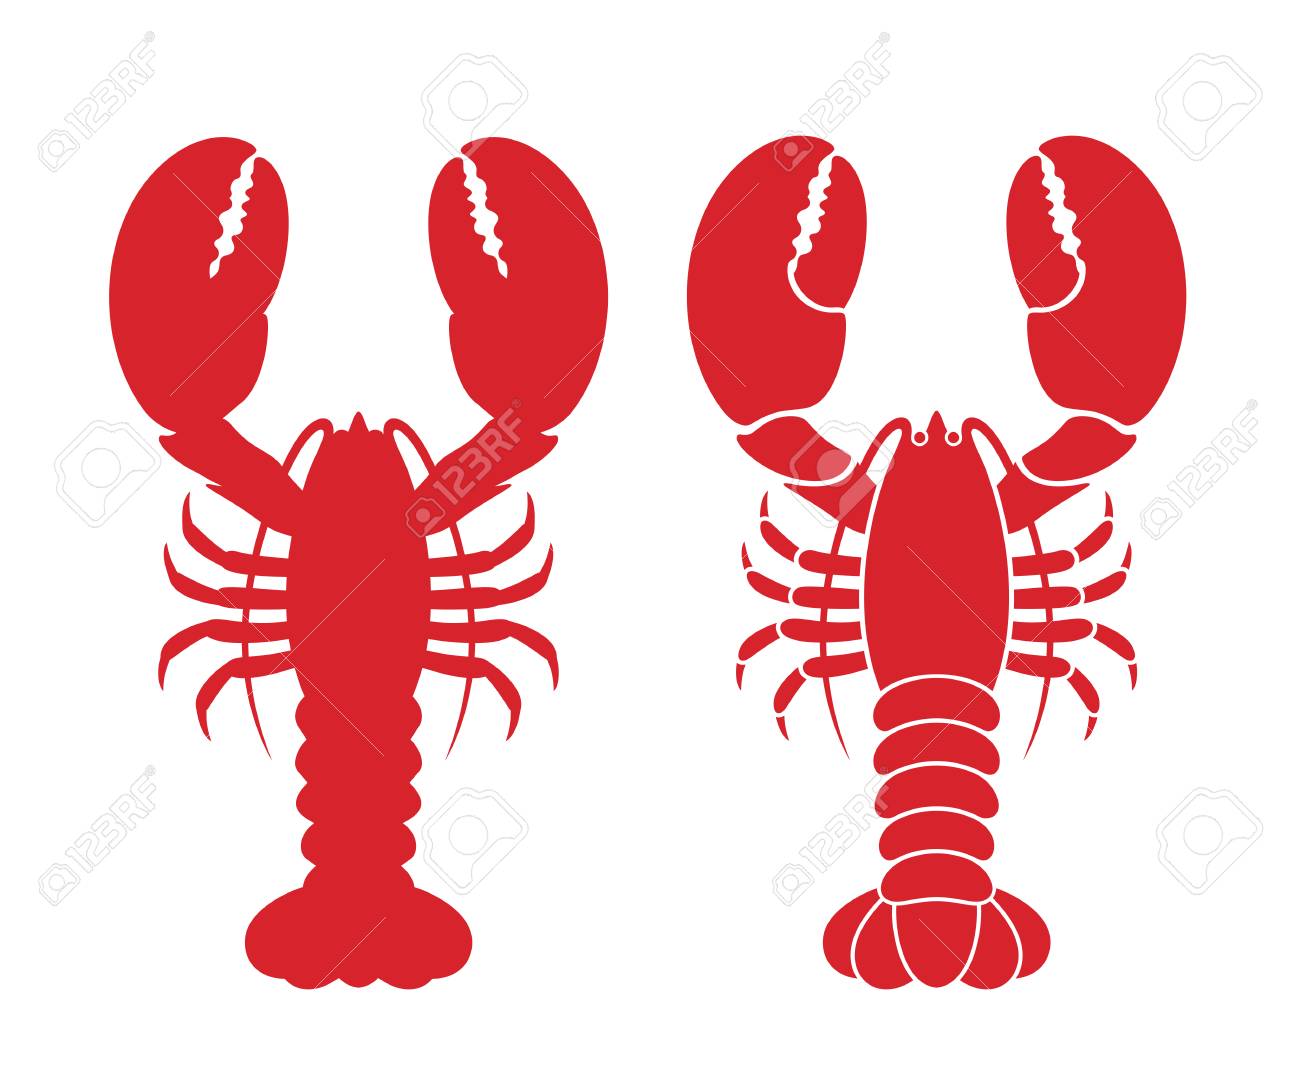 Lobster Logo Isolated On White Background Royalty